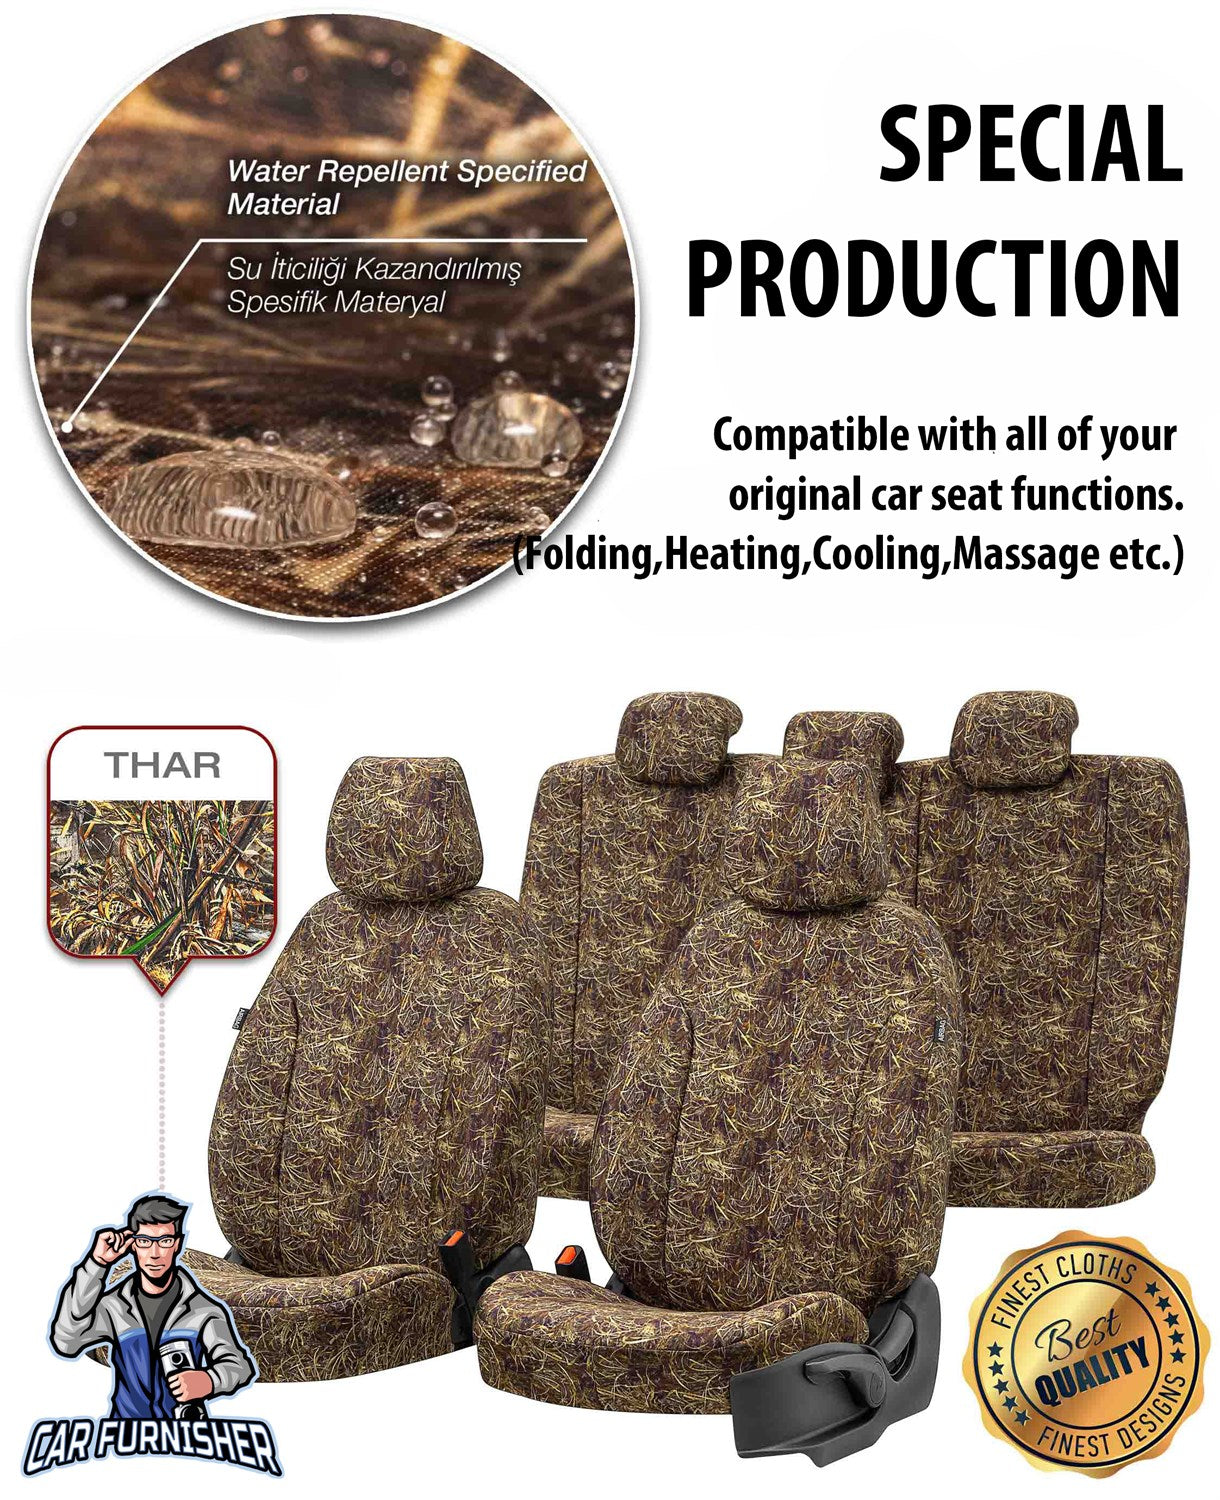 Toyota Avensis Seat Cover Camouflage Waterproof Design Montblanc Camo Waterproof Fabric